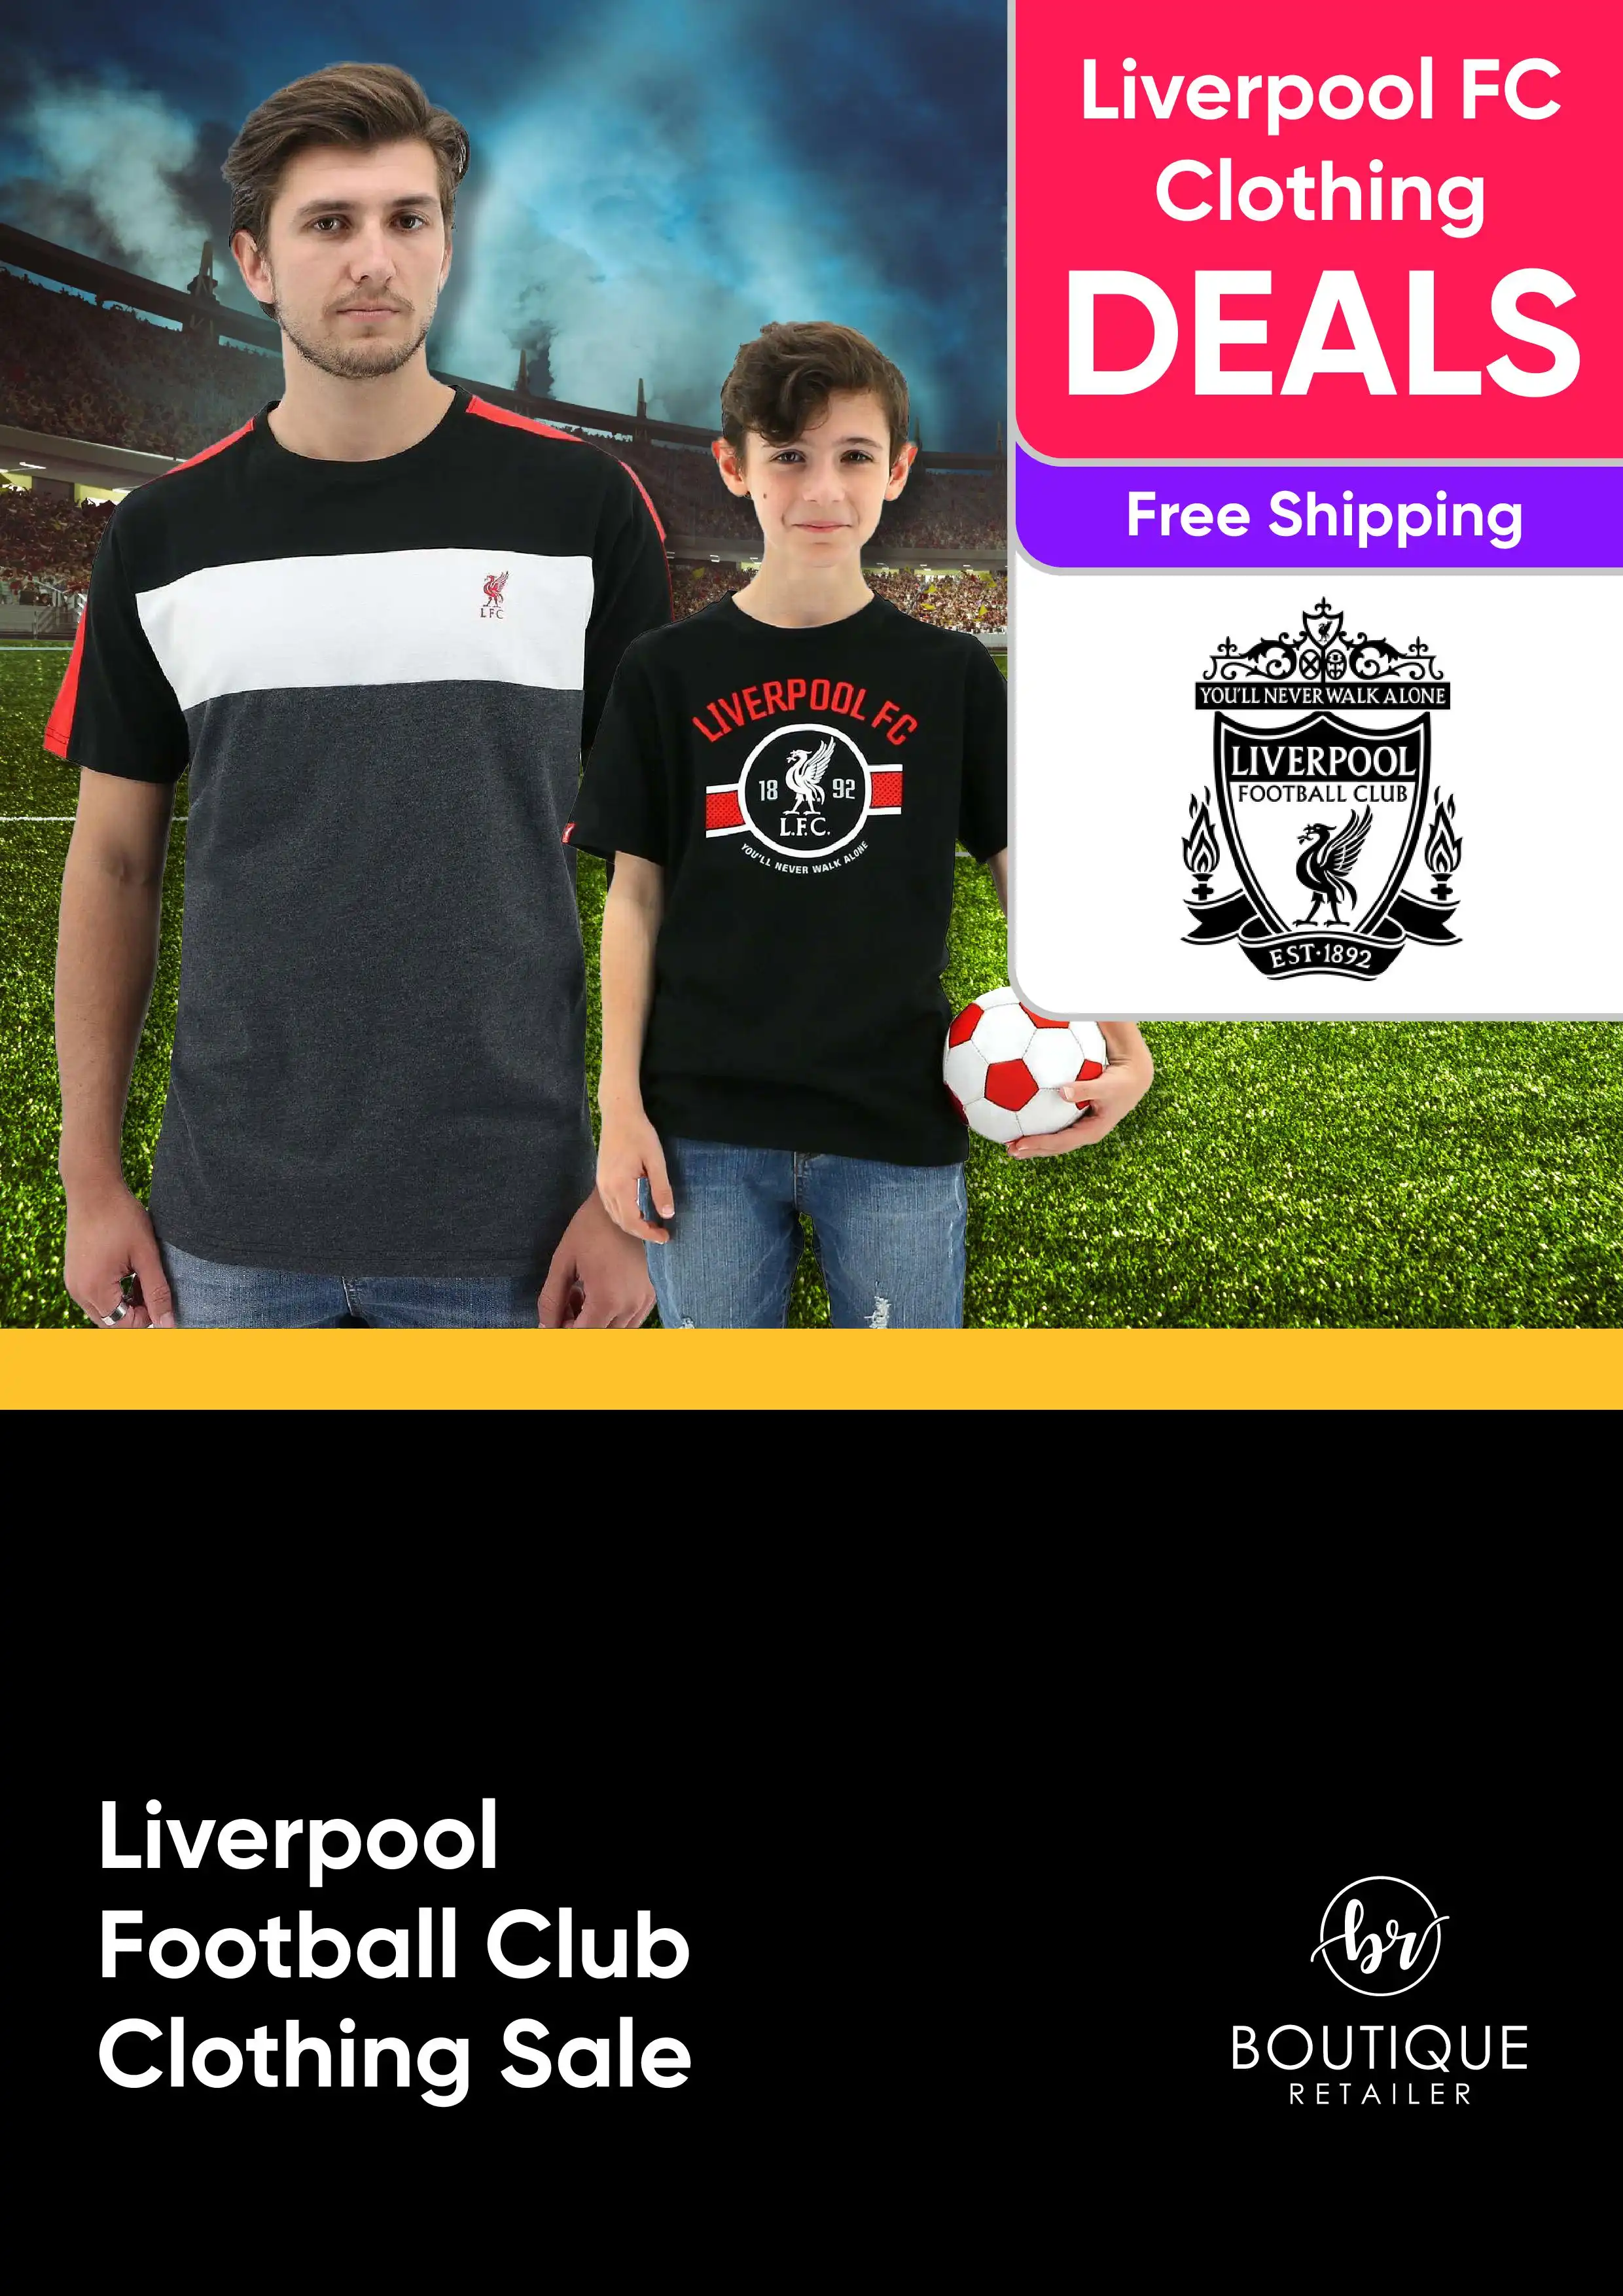 Liverpool Football Club Clothing Sale - Liverpool FC - Free Shipping